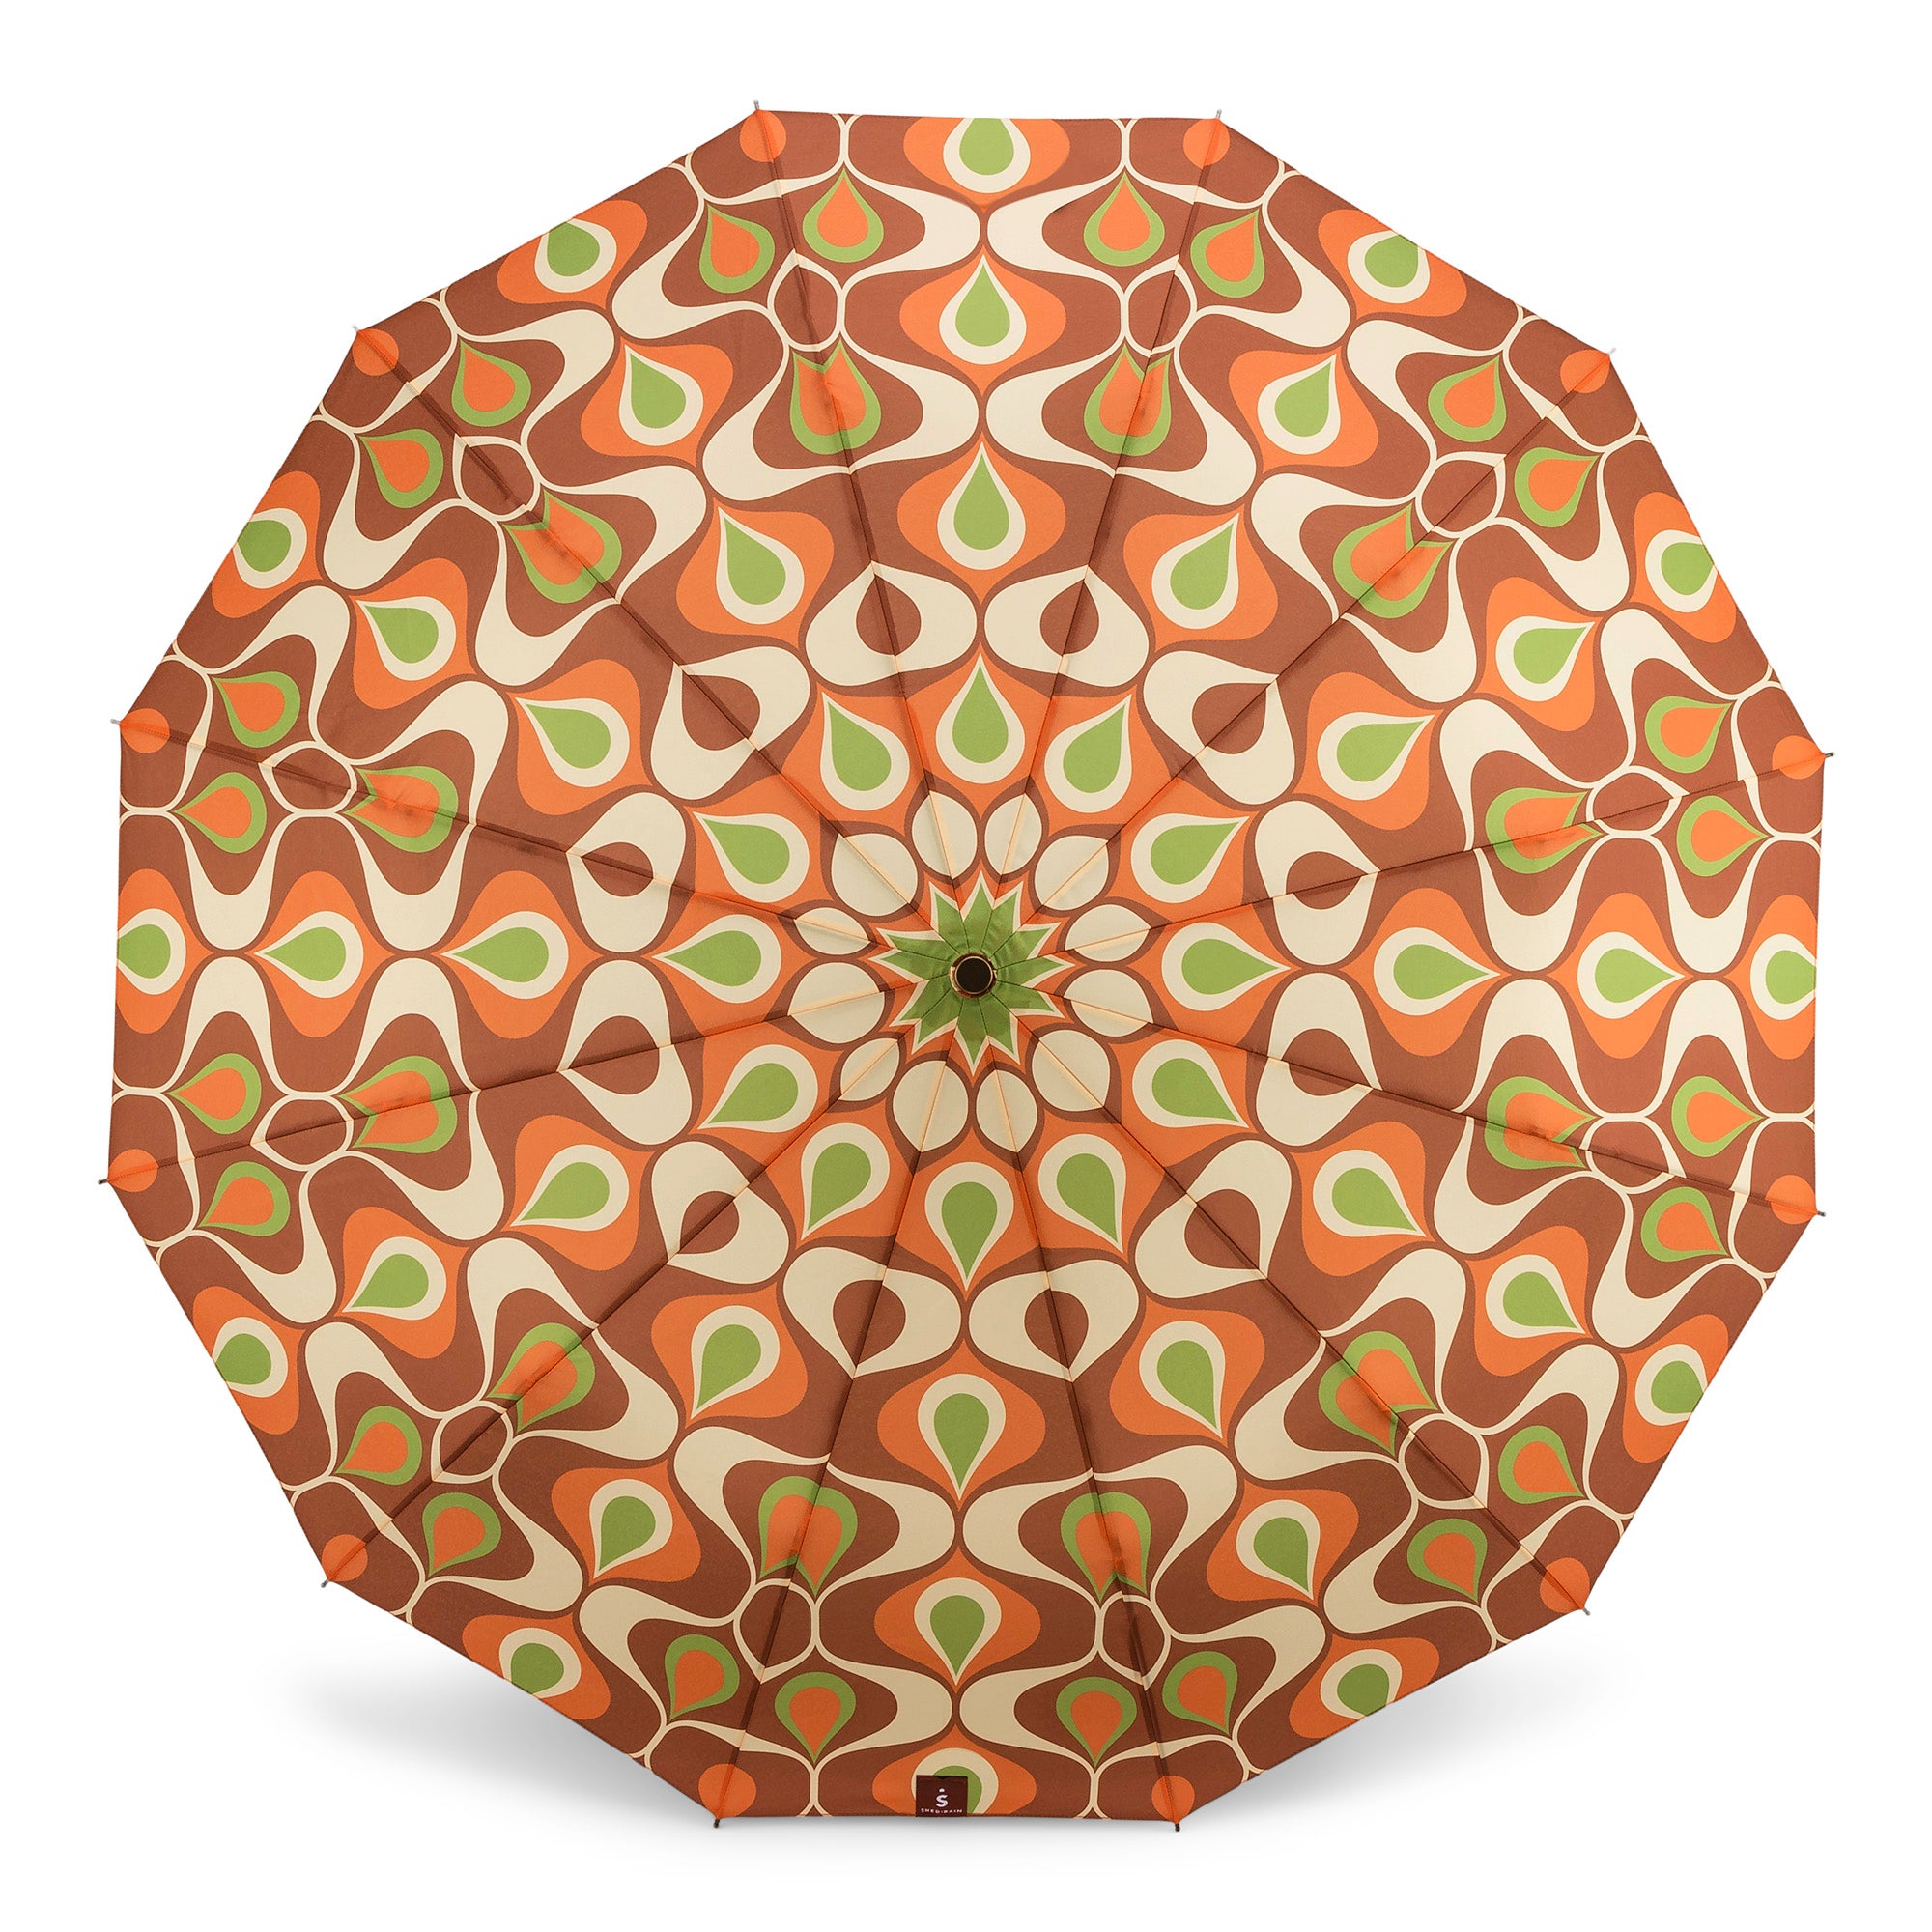 1970s Vintage Style Manual Compact Umbrella; far out pattern